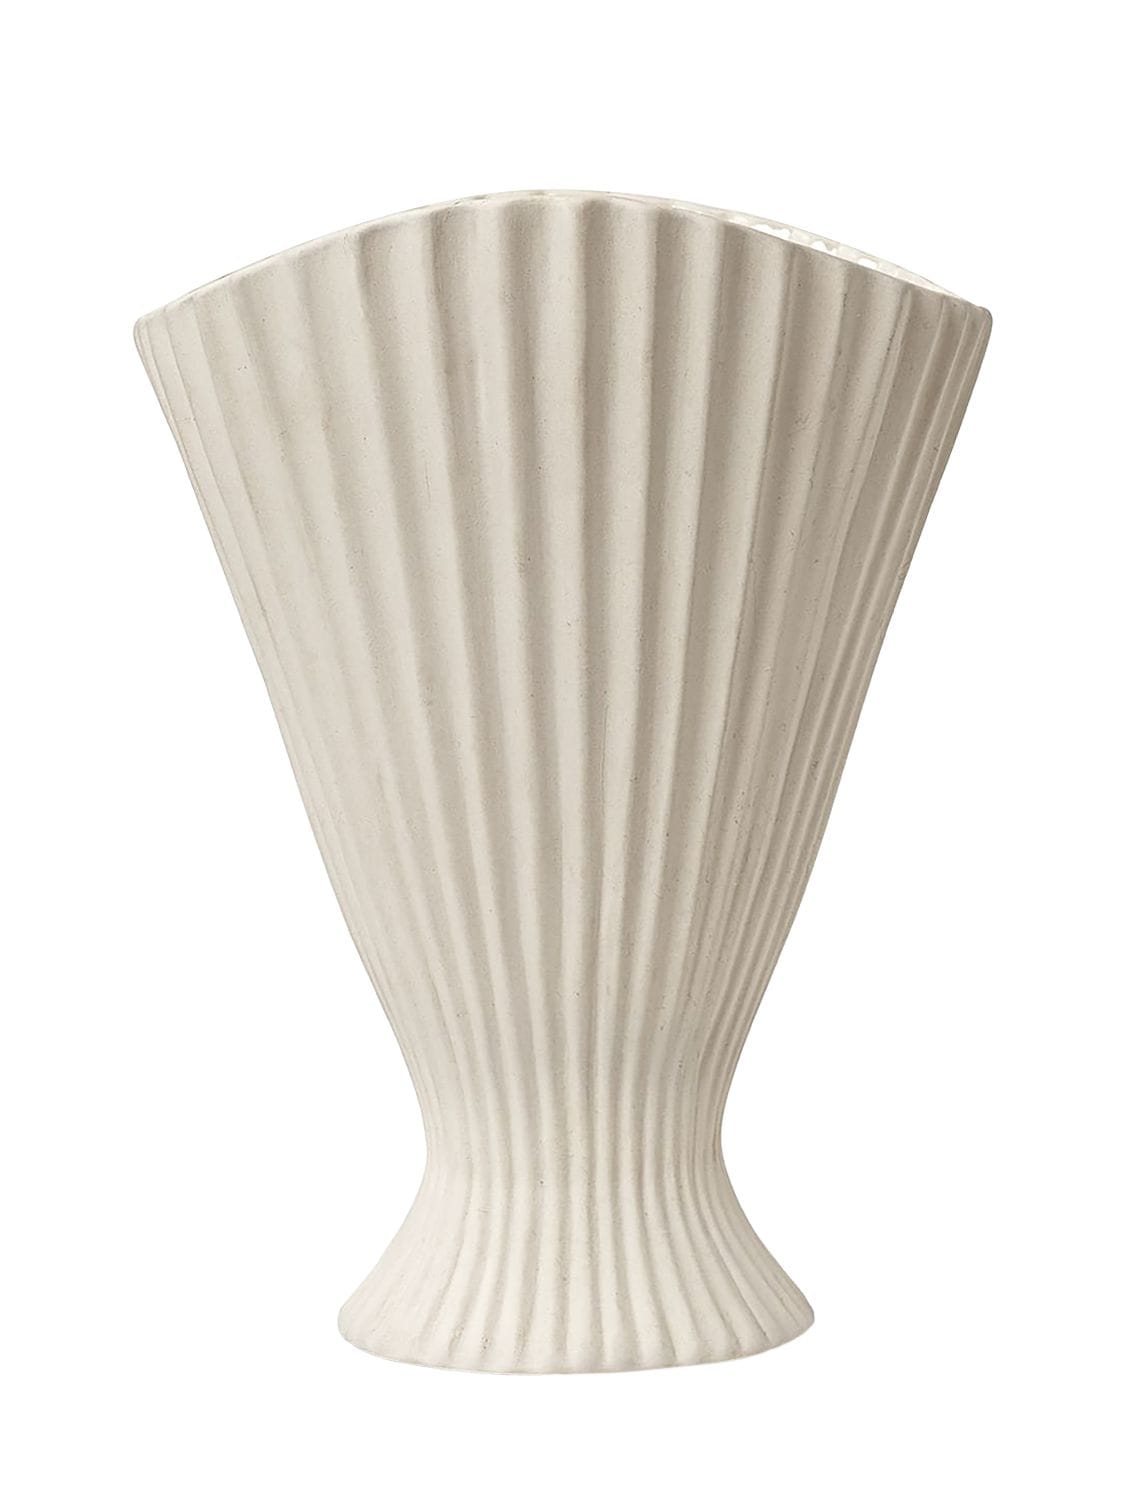 Image of Fountain Vase